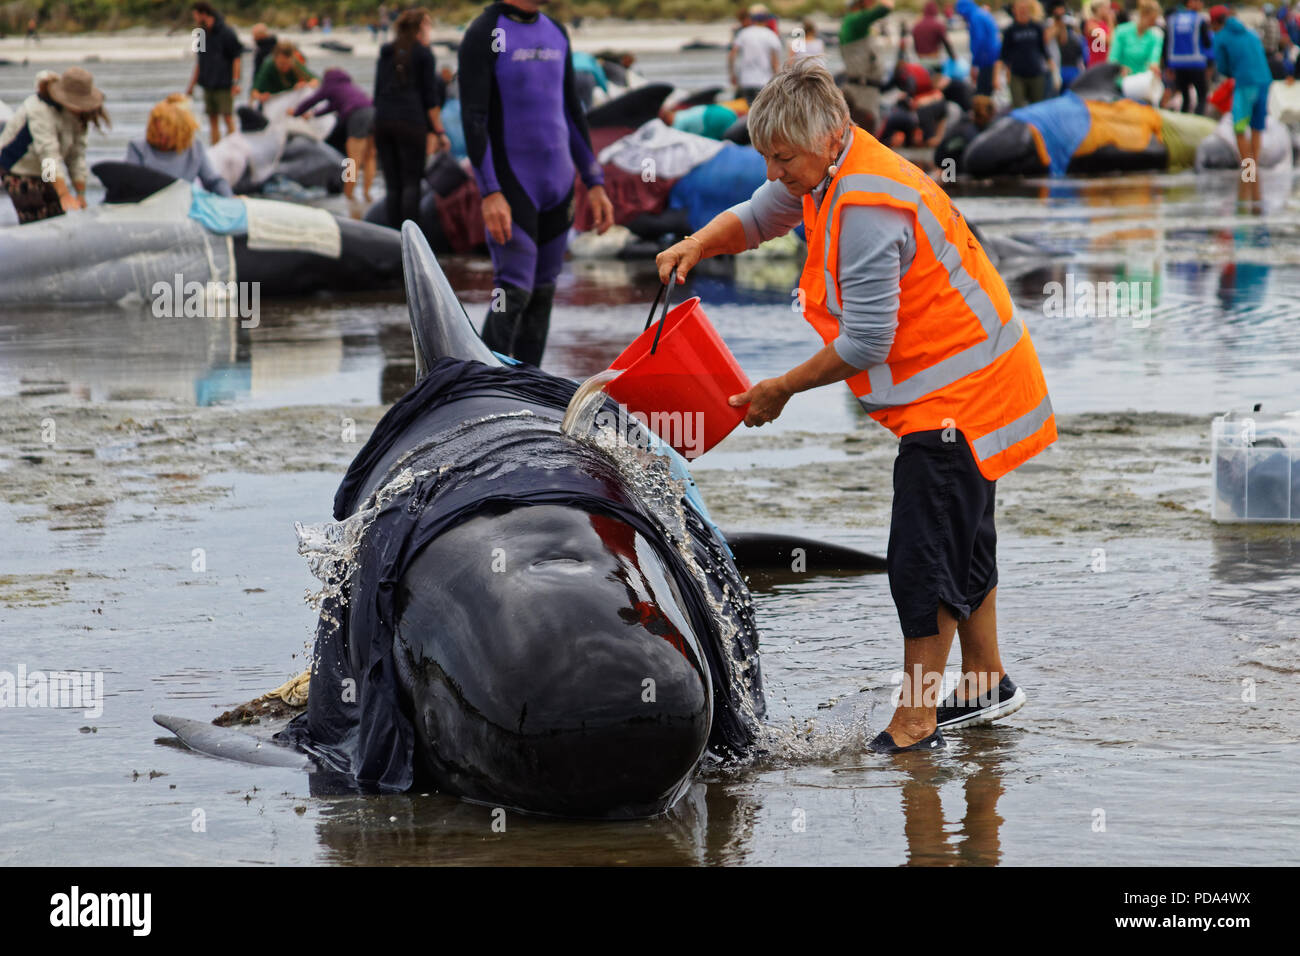 New Zealand, Farewell Spit, whale stranding, animal, whale, sea, water, fin, emotional, coast, cetacean, sad, stranded, sea mammal, died, open, sandy  Stock Photo